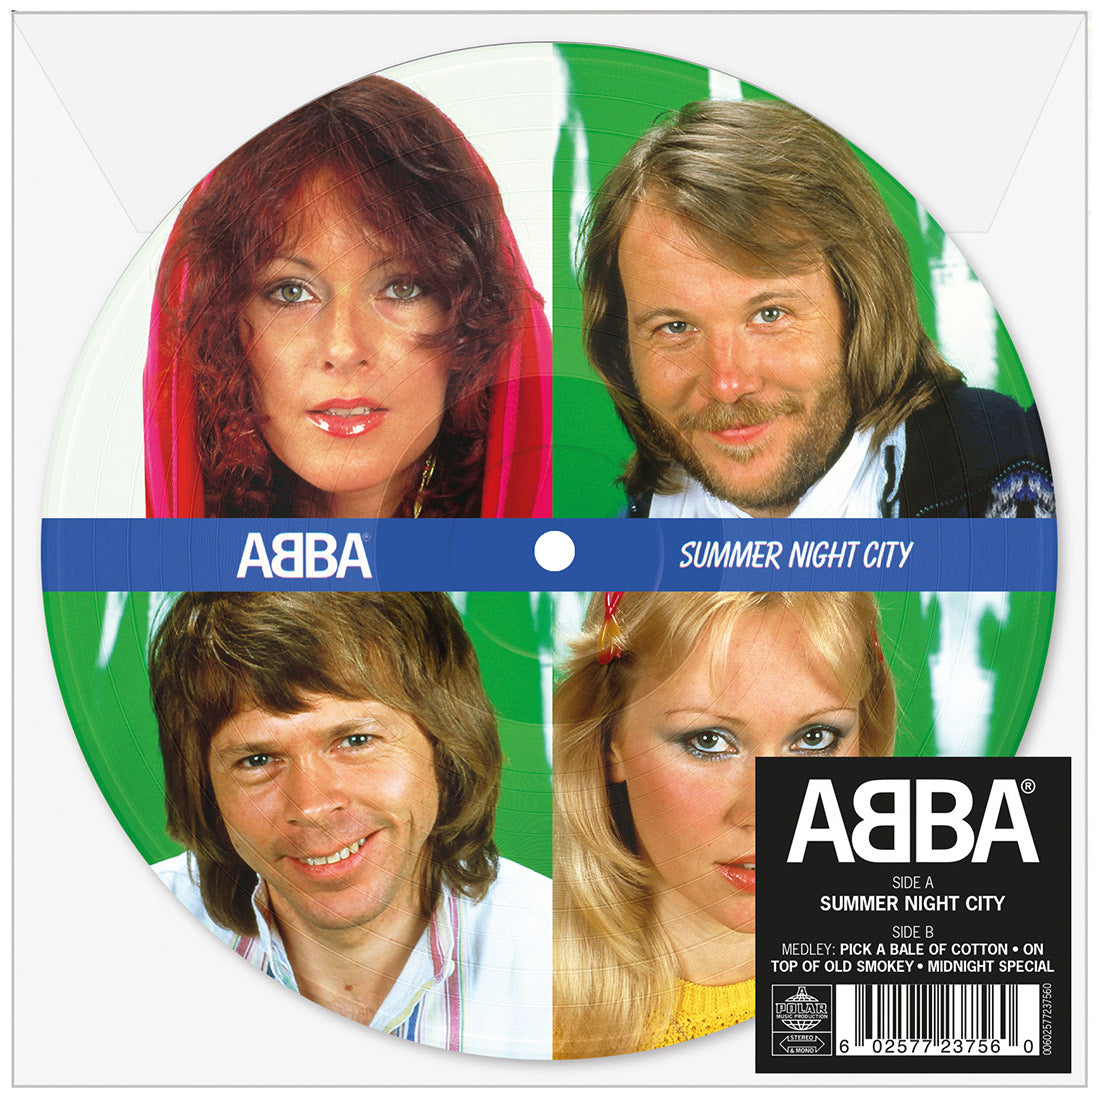 ABBA - Summernight City: Limited Picture Disc Vinyl 7"